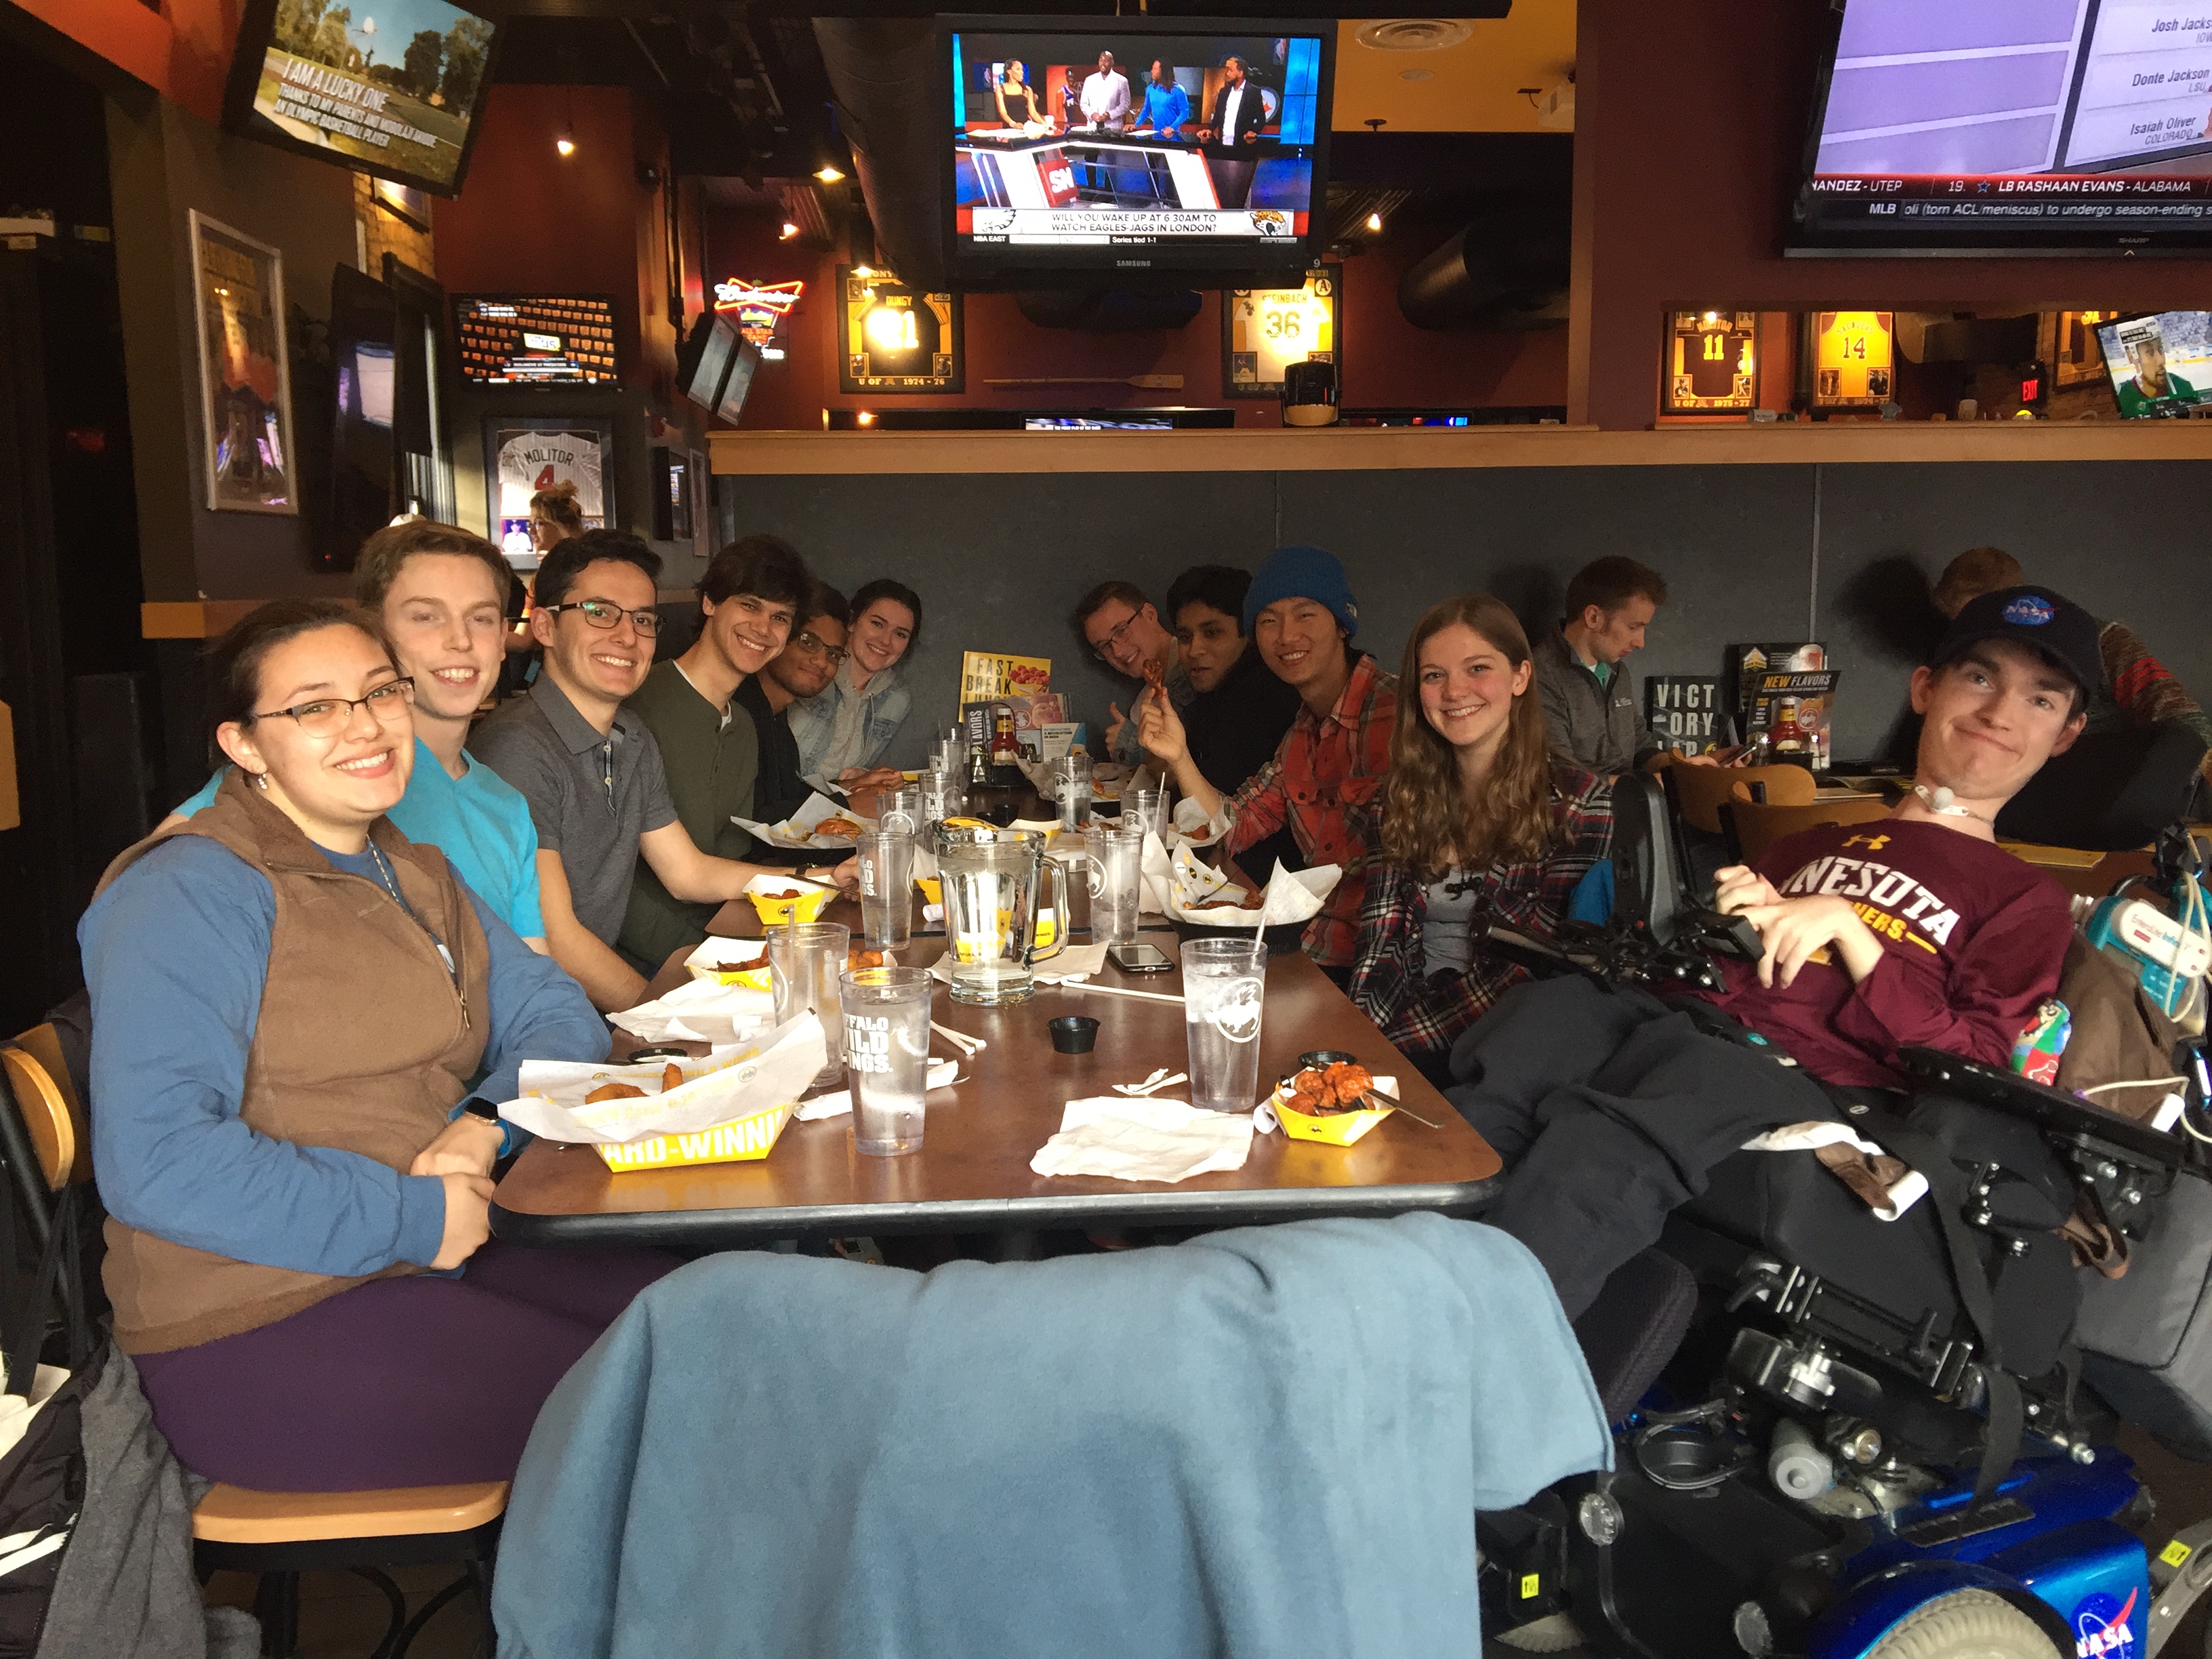 Team members celebrate their positive CDR feedback with a trip to Buffalo Wild Wings.